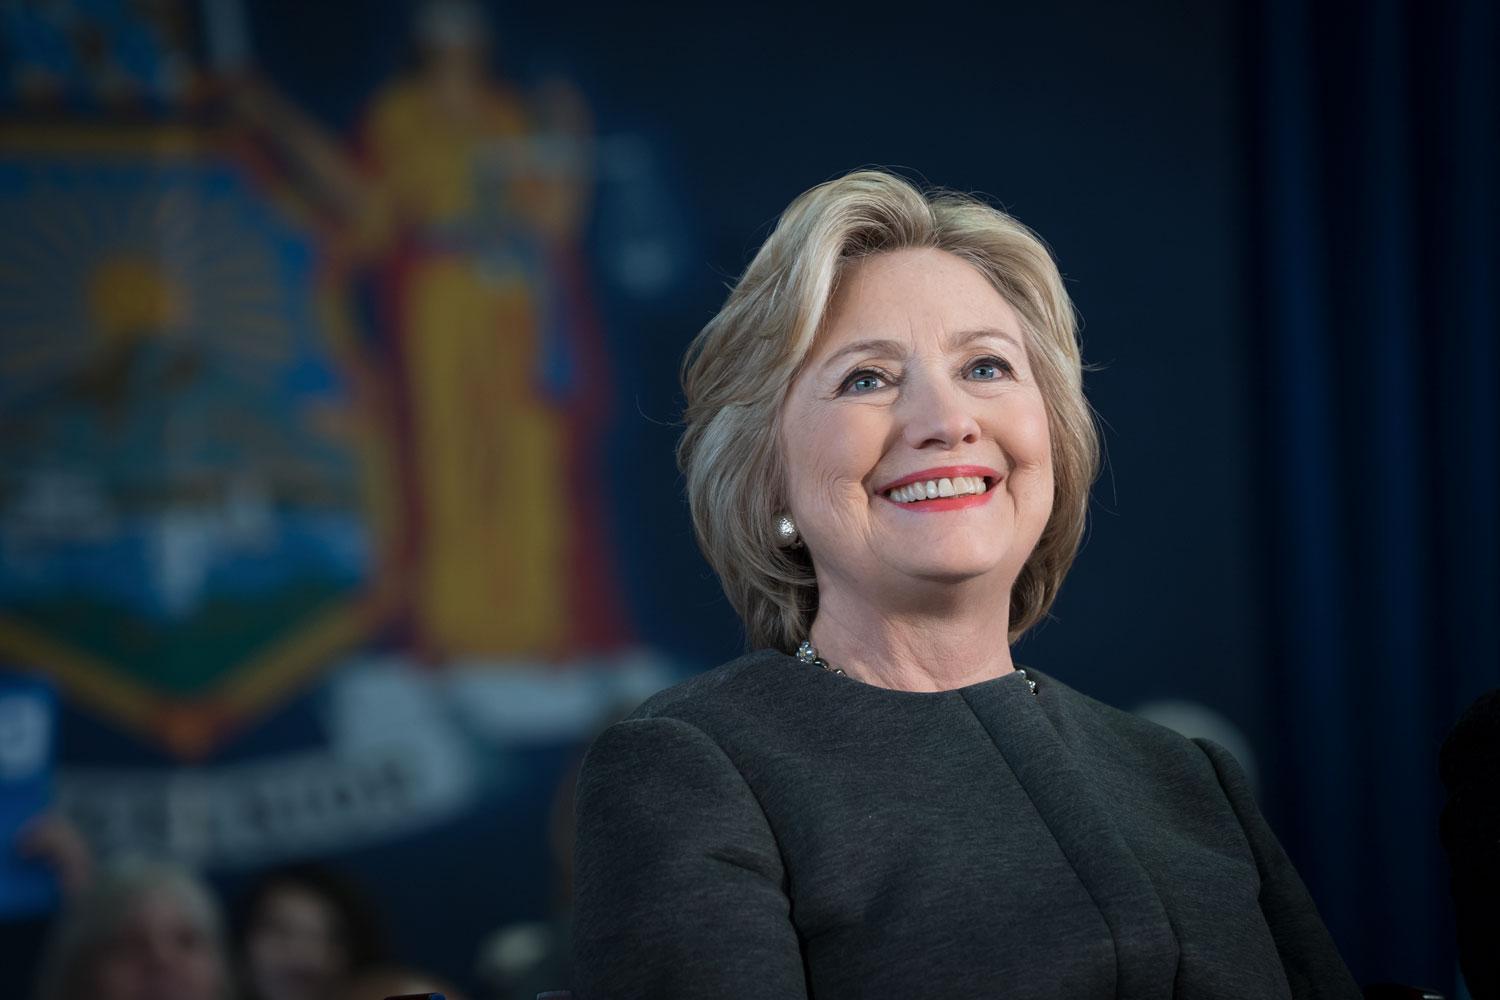 Former First Lady, Secretary of State and Democratic presidential nominee Hillary Rodham Clinton is headlining a major conference on women’s leadership at UVA.